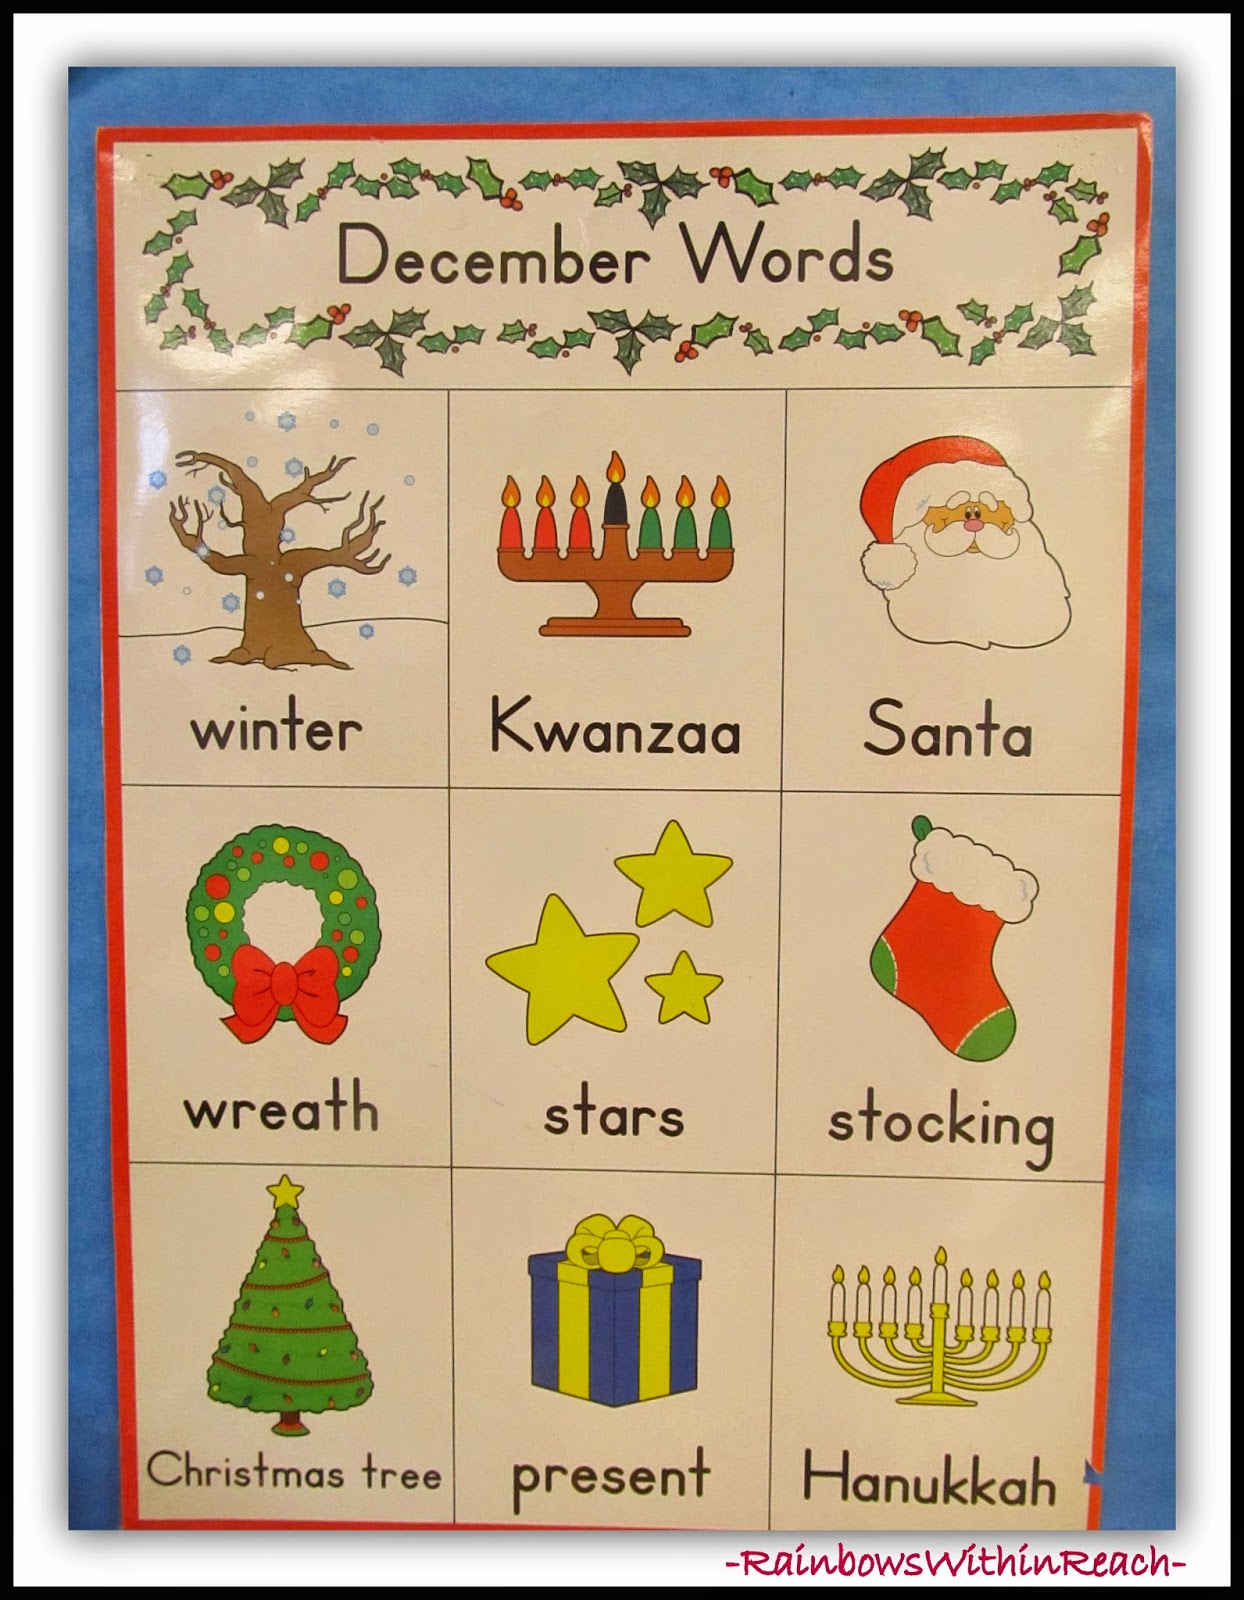 December Word Chart from Christmas Bulletin Board RoundUP at RainbowsWithinReach